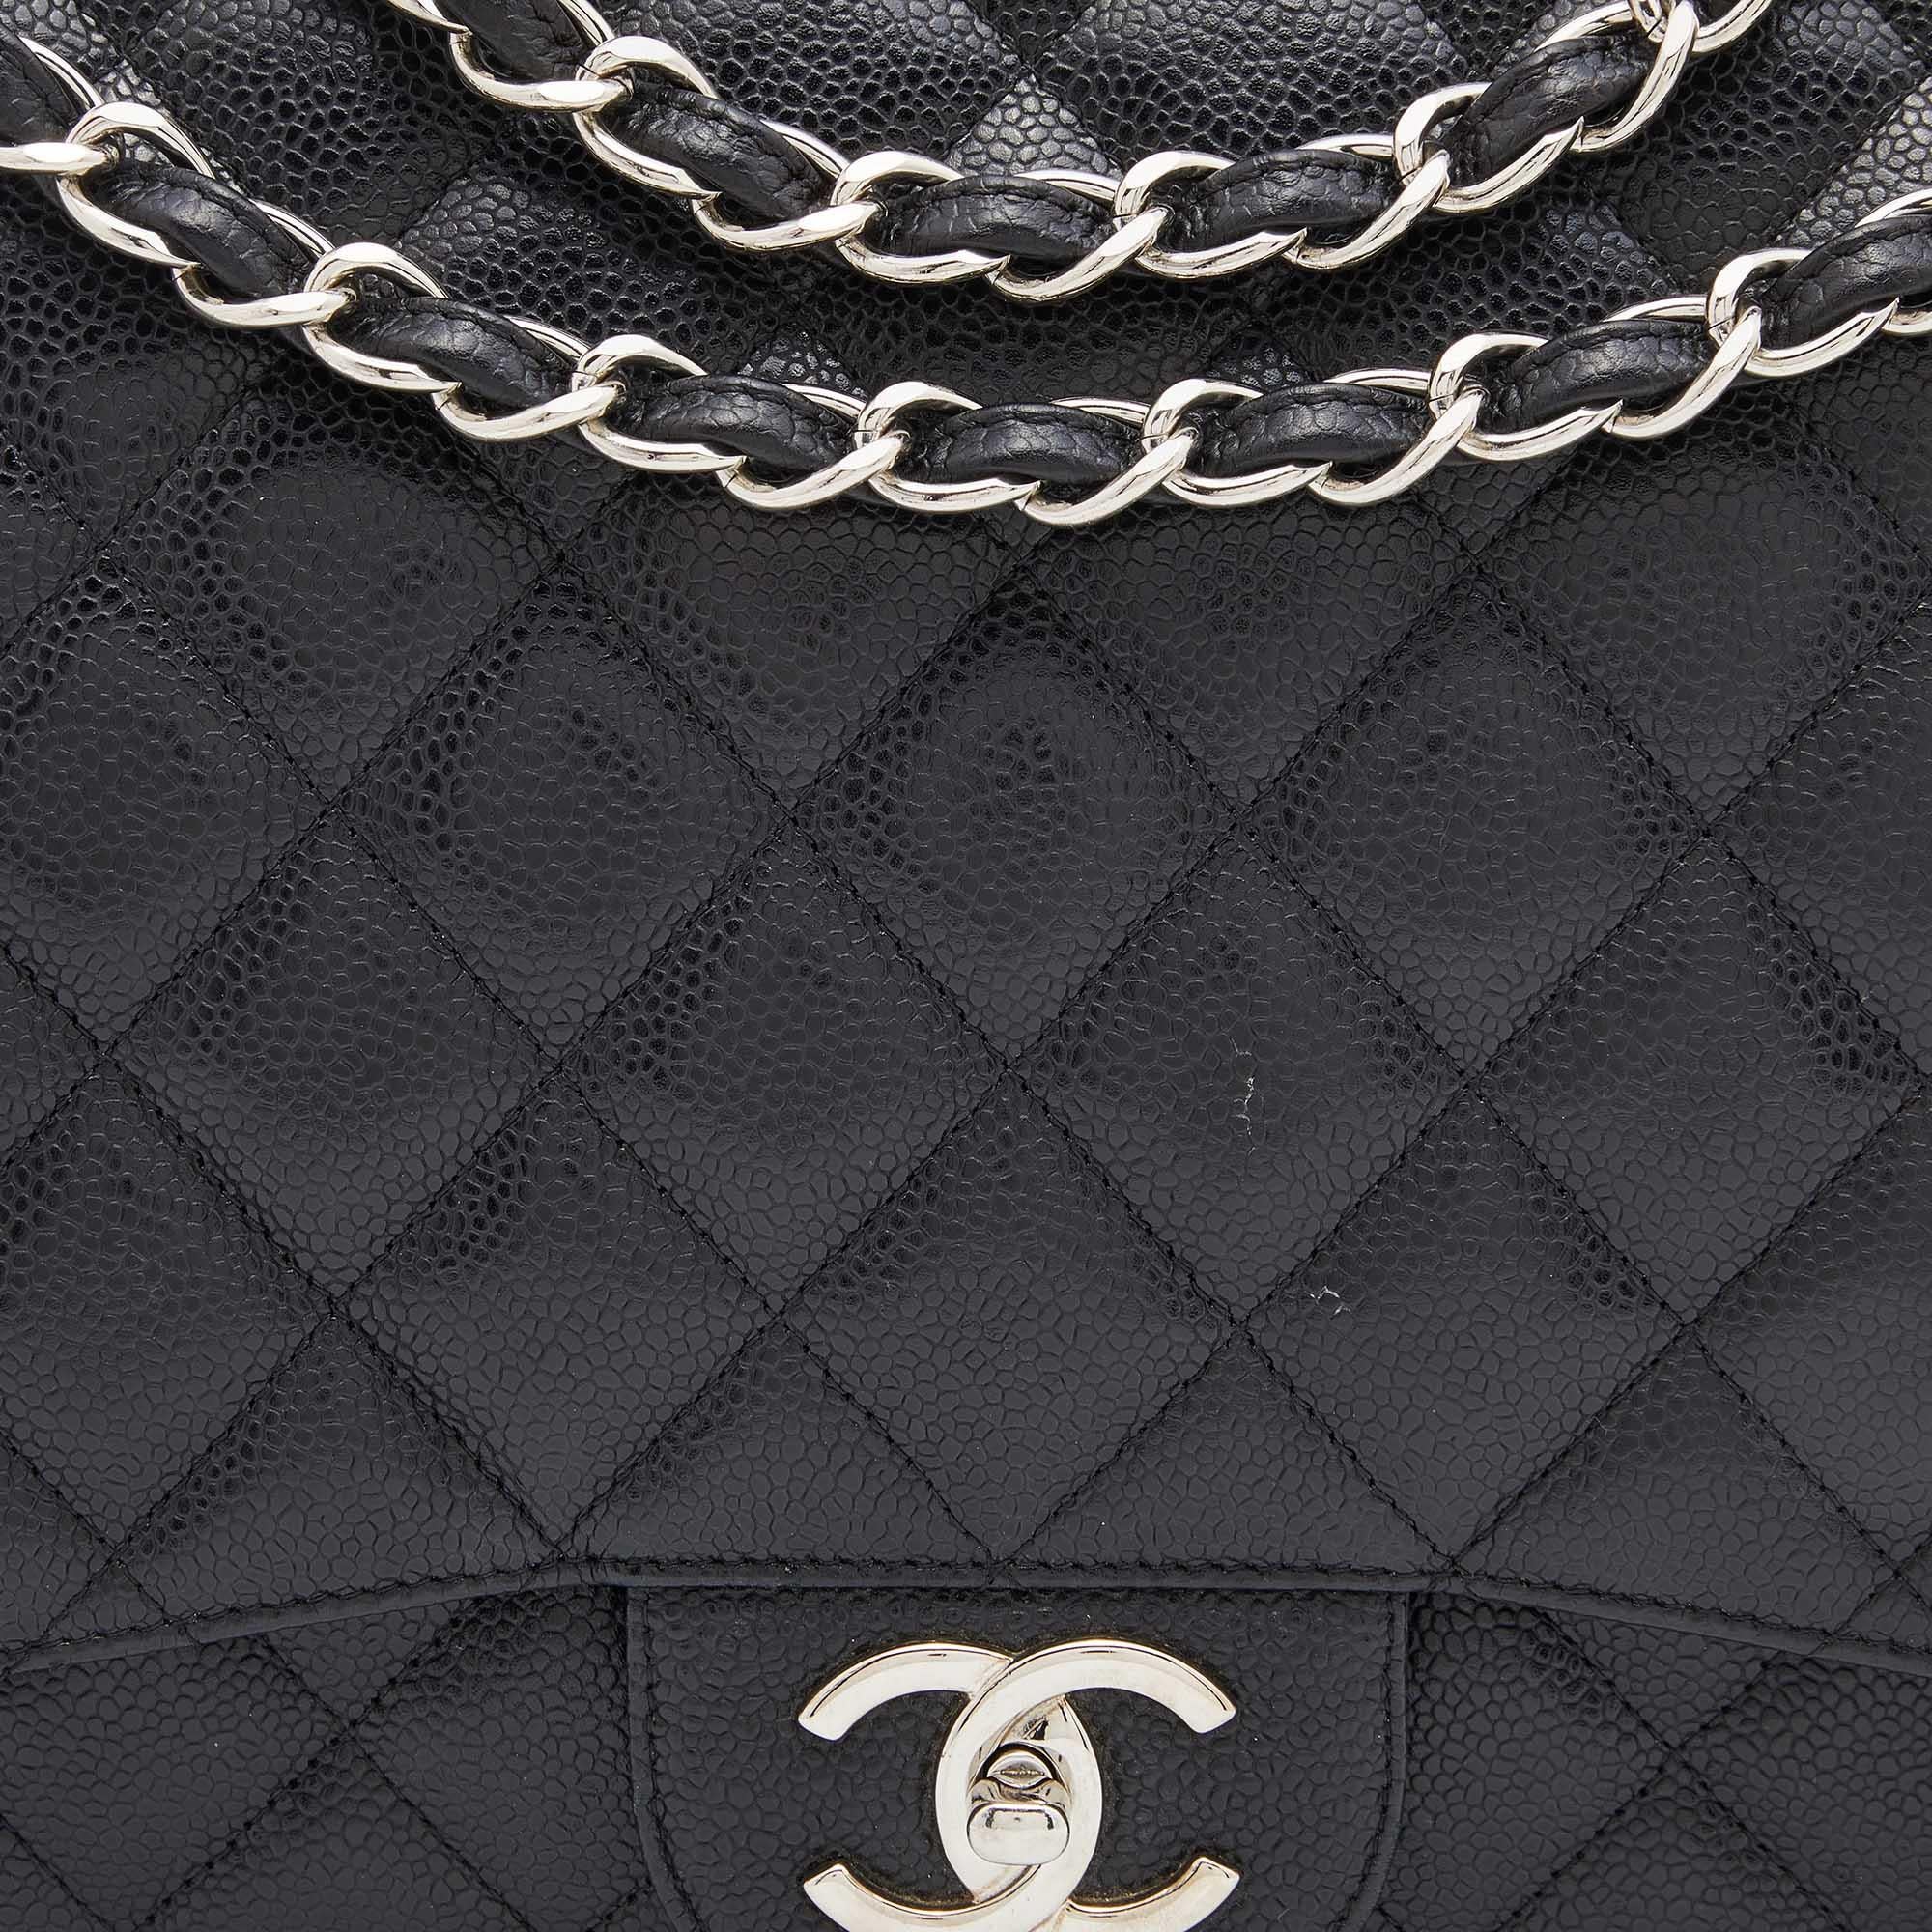 Chanel Black Quilted Caviar Leather Maxi Classic Double Flap Bag 10